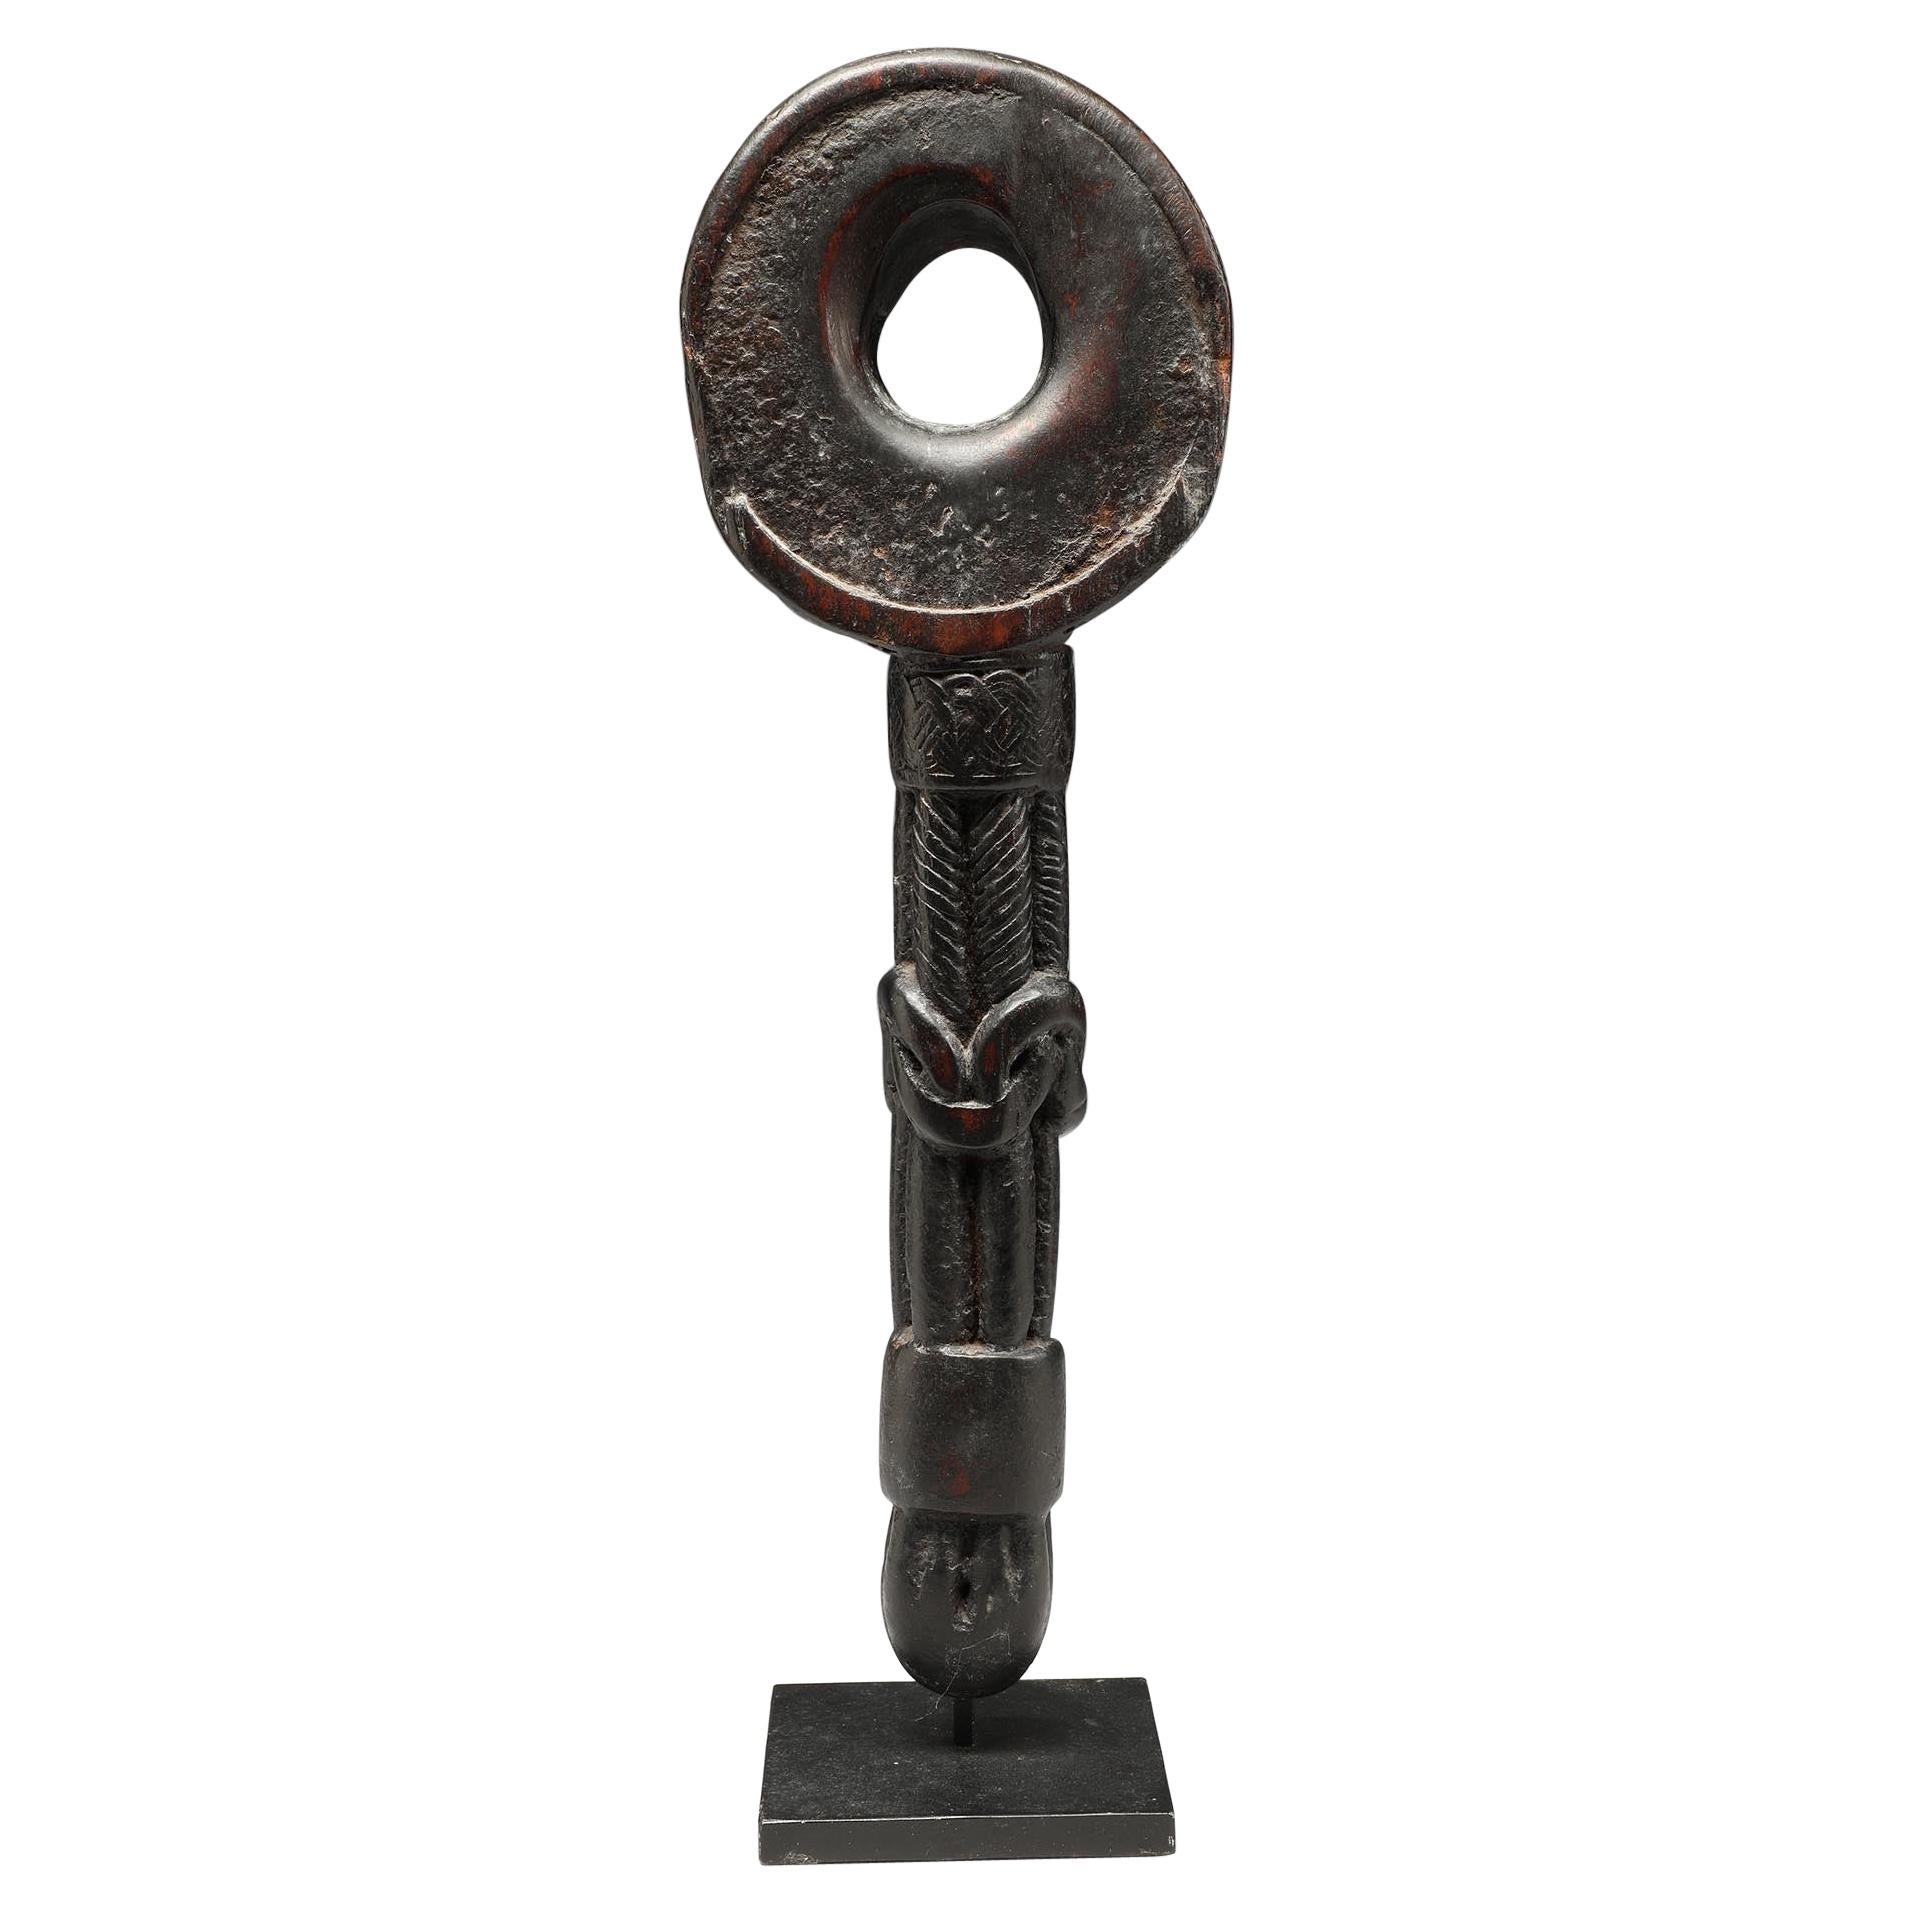 Nepal or Tibet Ghurra Churn Handle Carved Woven Knot, Old Worn Dark Patina For Sale